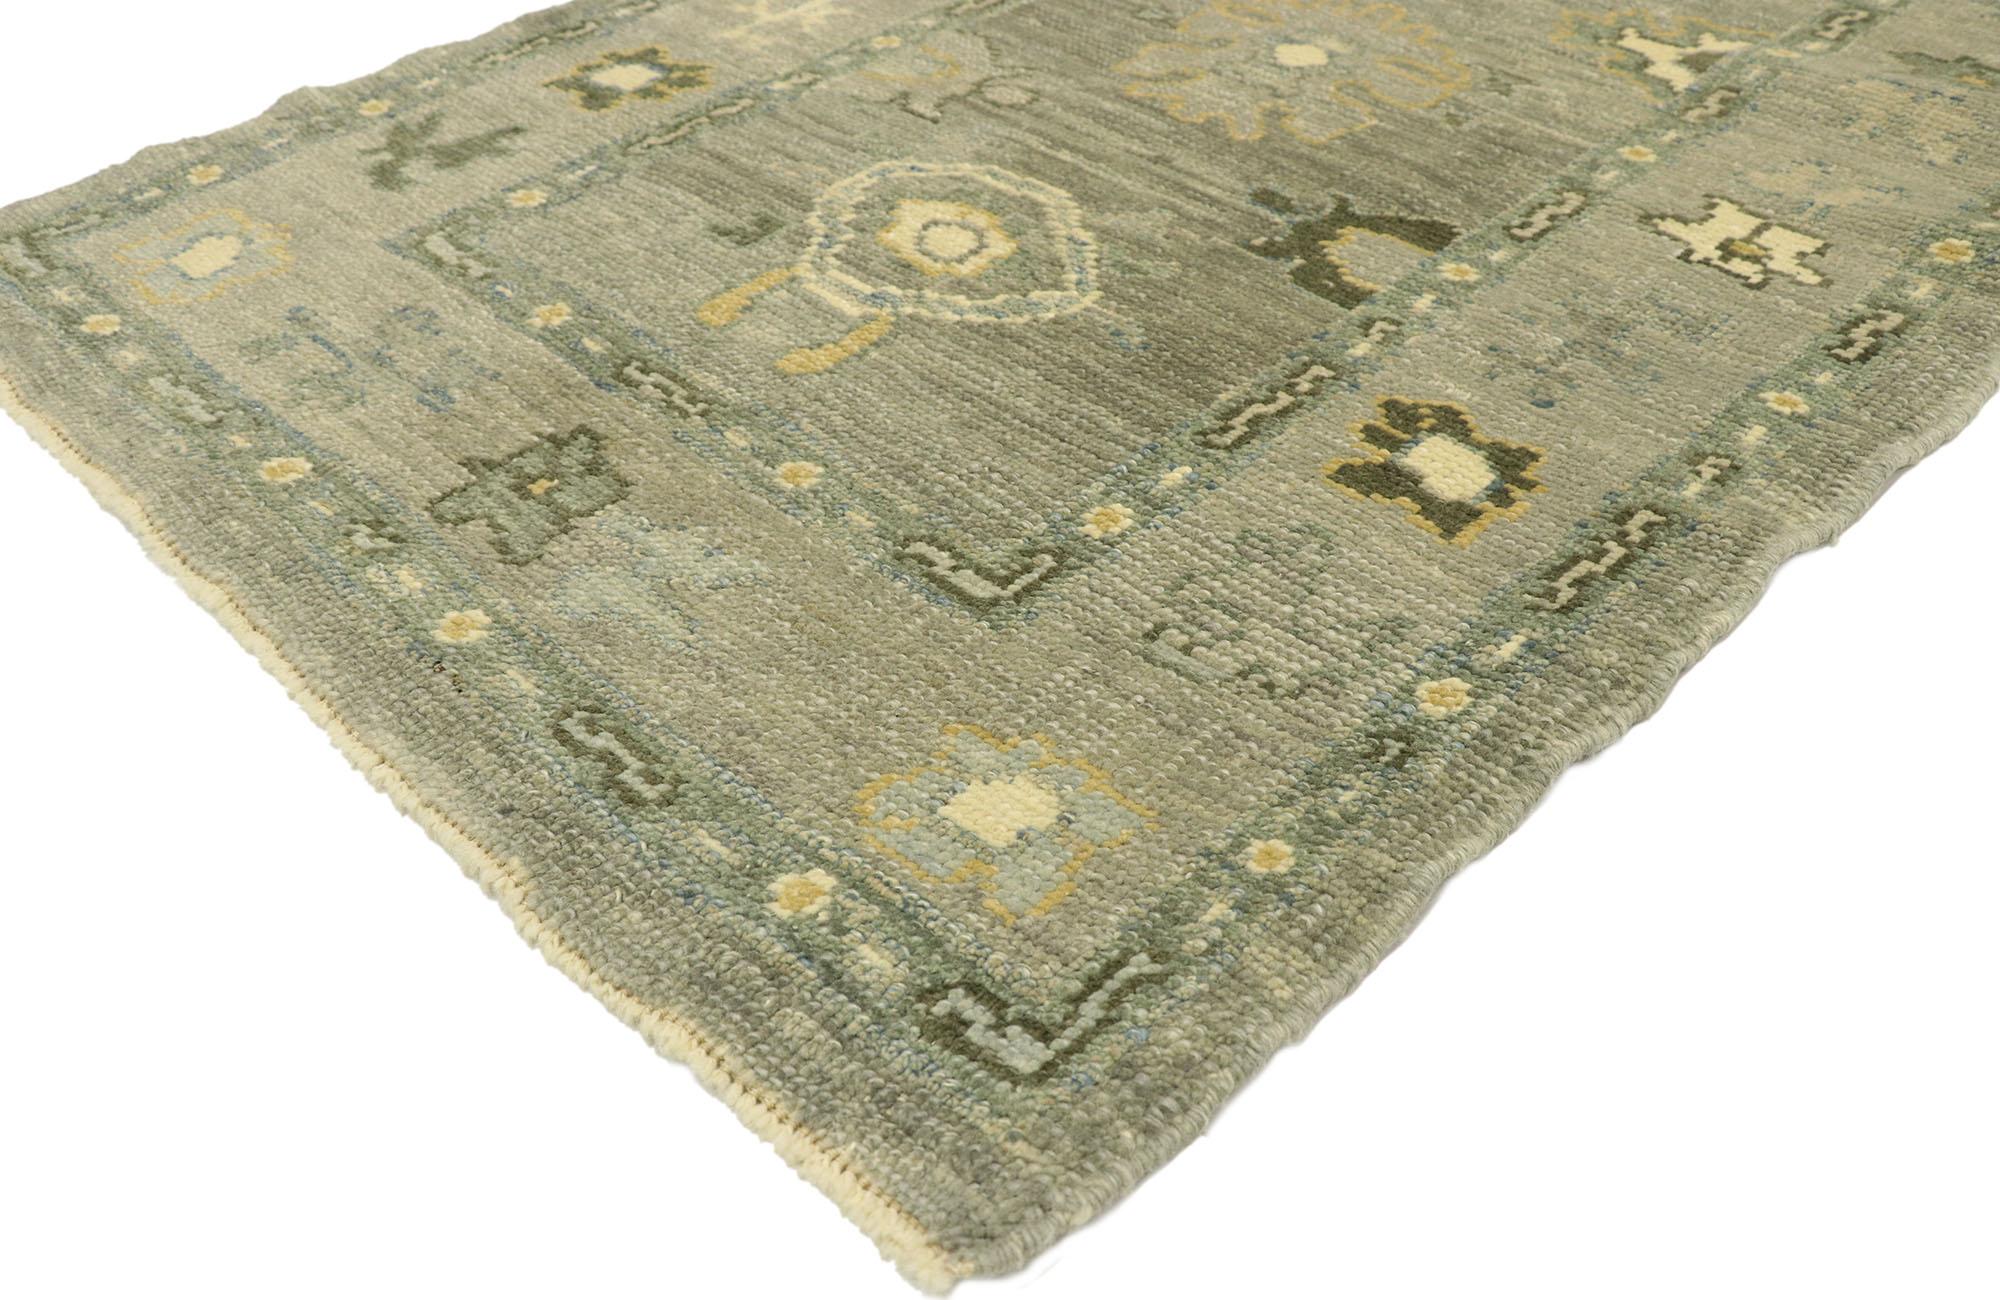 52816, new contemporary Turkish Oushak Runner with modern style. This hand knotted wool new contemporary Turkish Oushak runner features an all-over botanical pattern composed of Harshang style motifs, blooming palmettes, leafy tendrils, and organic